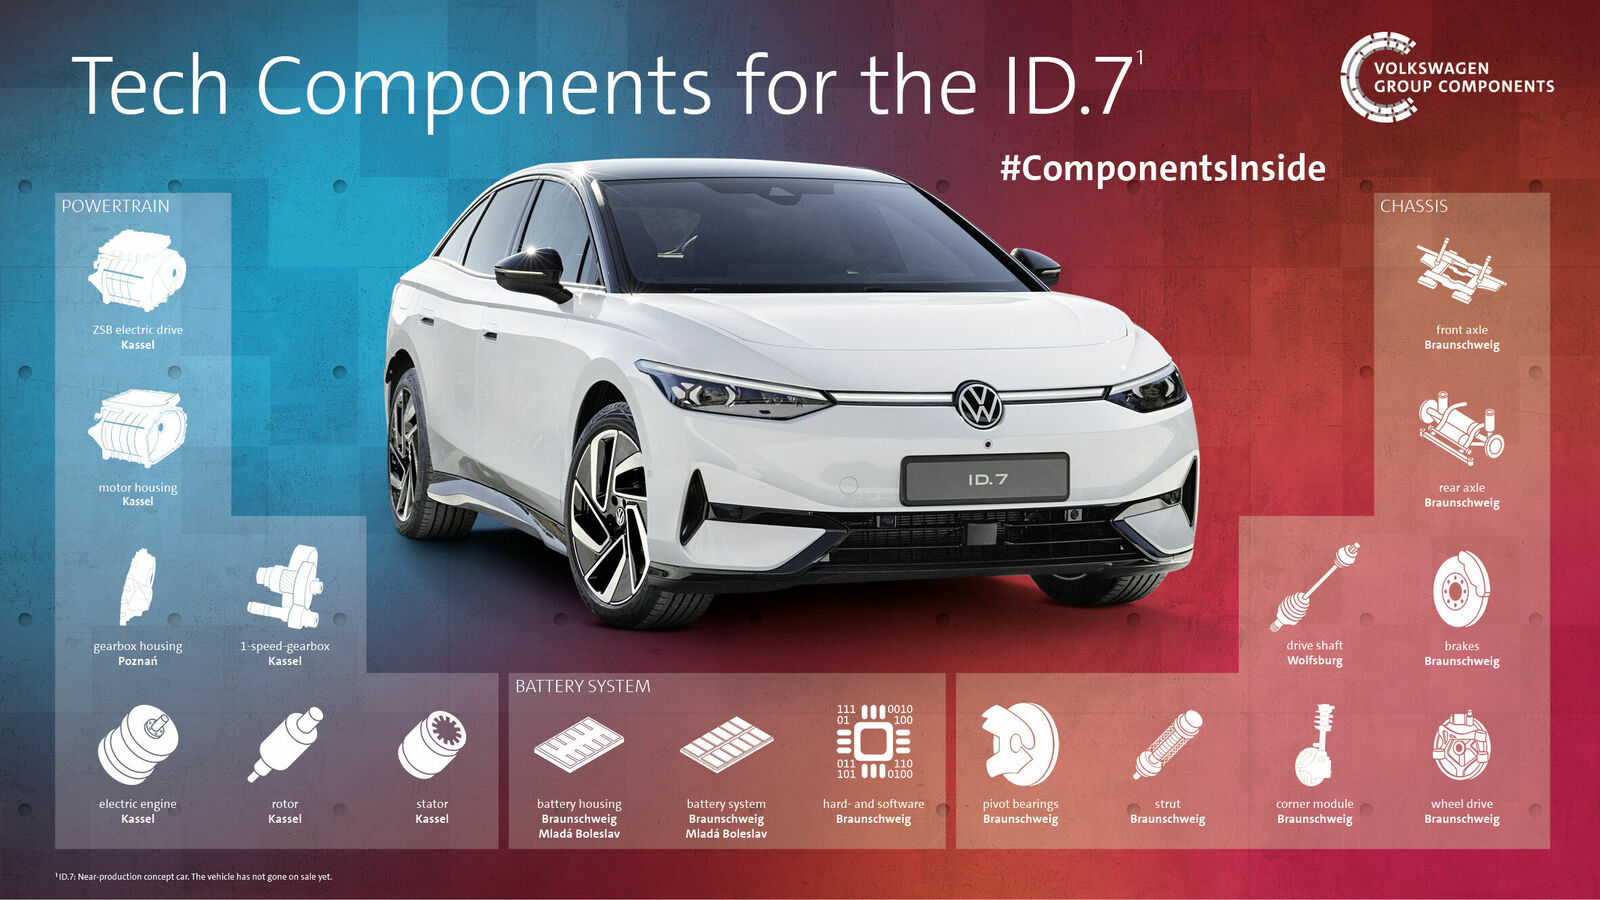 Volkswagen Group Technology: Bundling competencies to become a technology leader in e-mobility